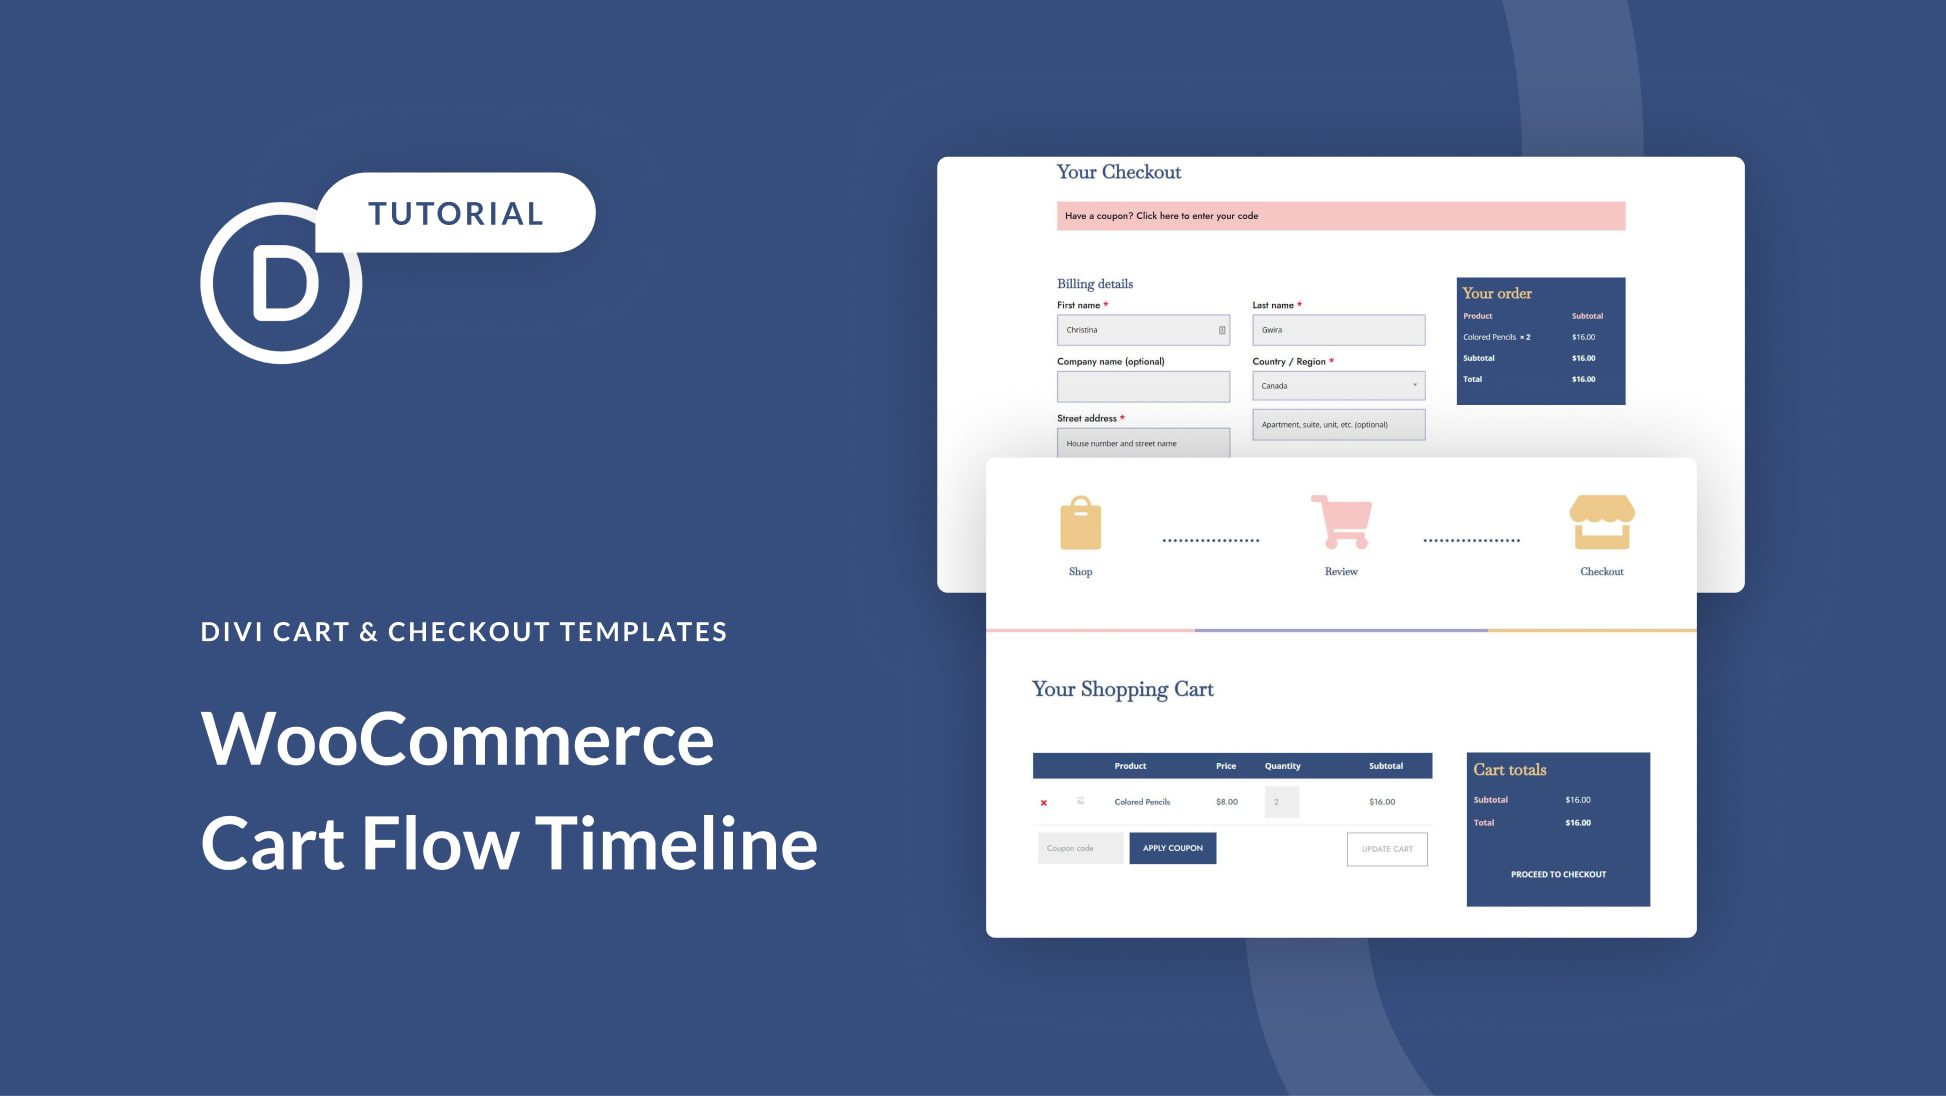 How to Design a WooCommerce Cart Flow Timeline for Your Divi